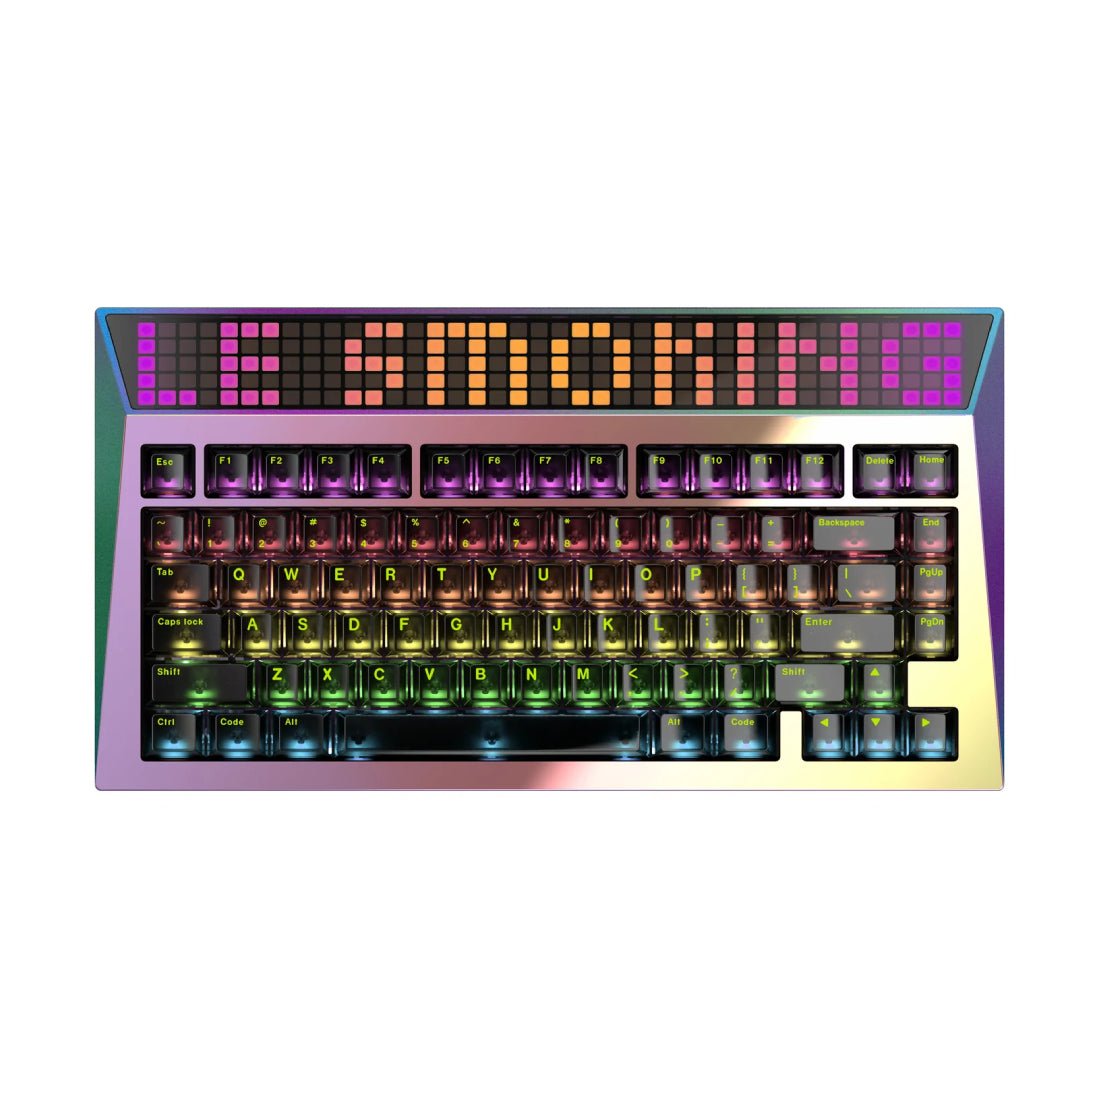 AngryMiao Cyberboard R2 Le Smoking Wireless Keyboard Limited Edition - Psychedelic - Store 974 | ستور ٩٧٤